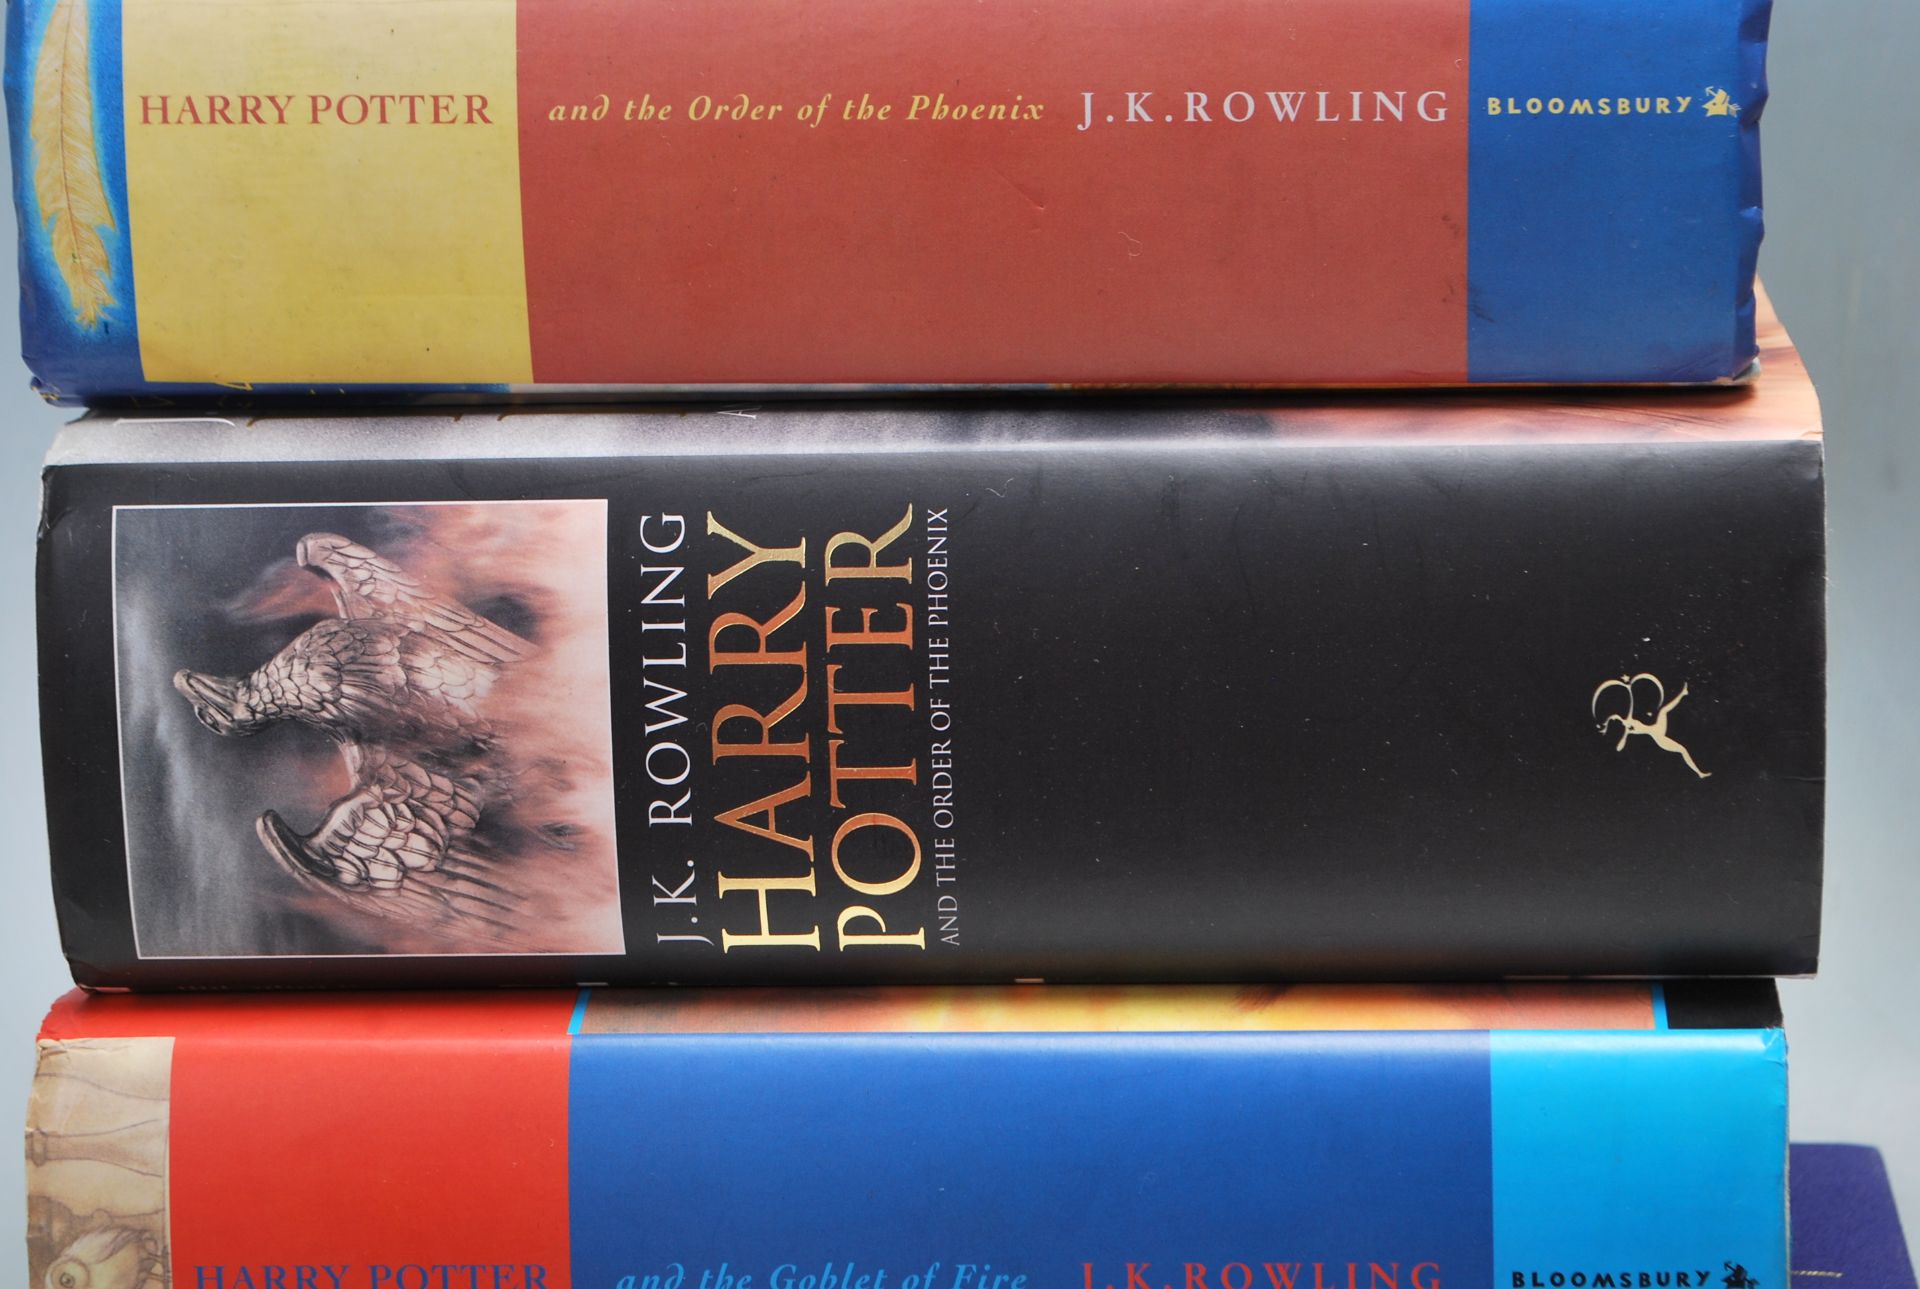 HARRY POTTER - J.K. ROWLING - FIRST EDITION BOOKS - BLOOMSBURY - Image 7 of 7